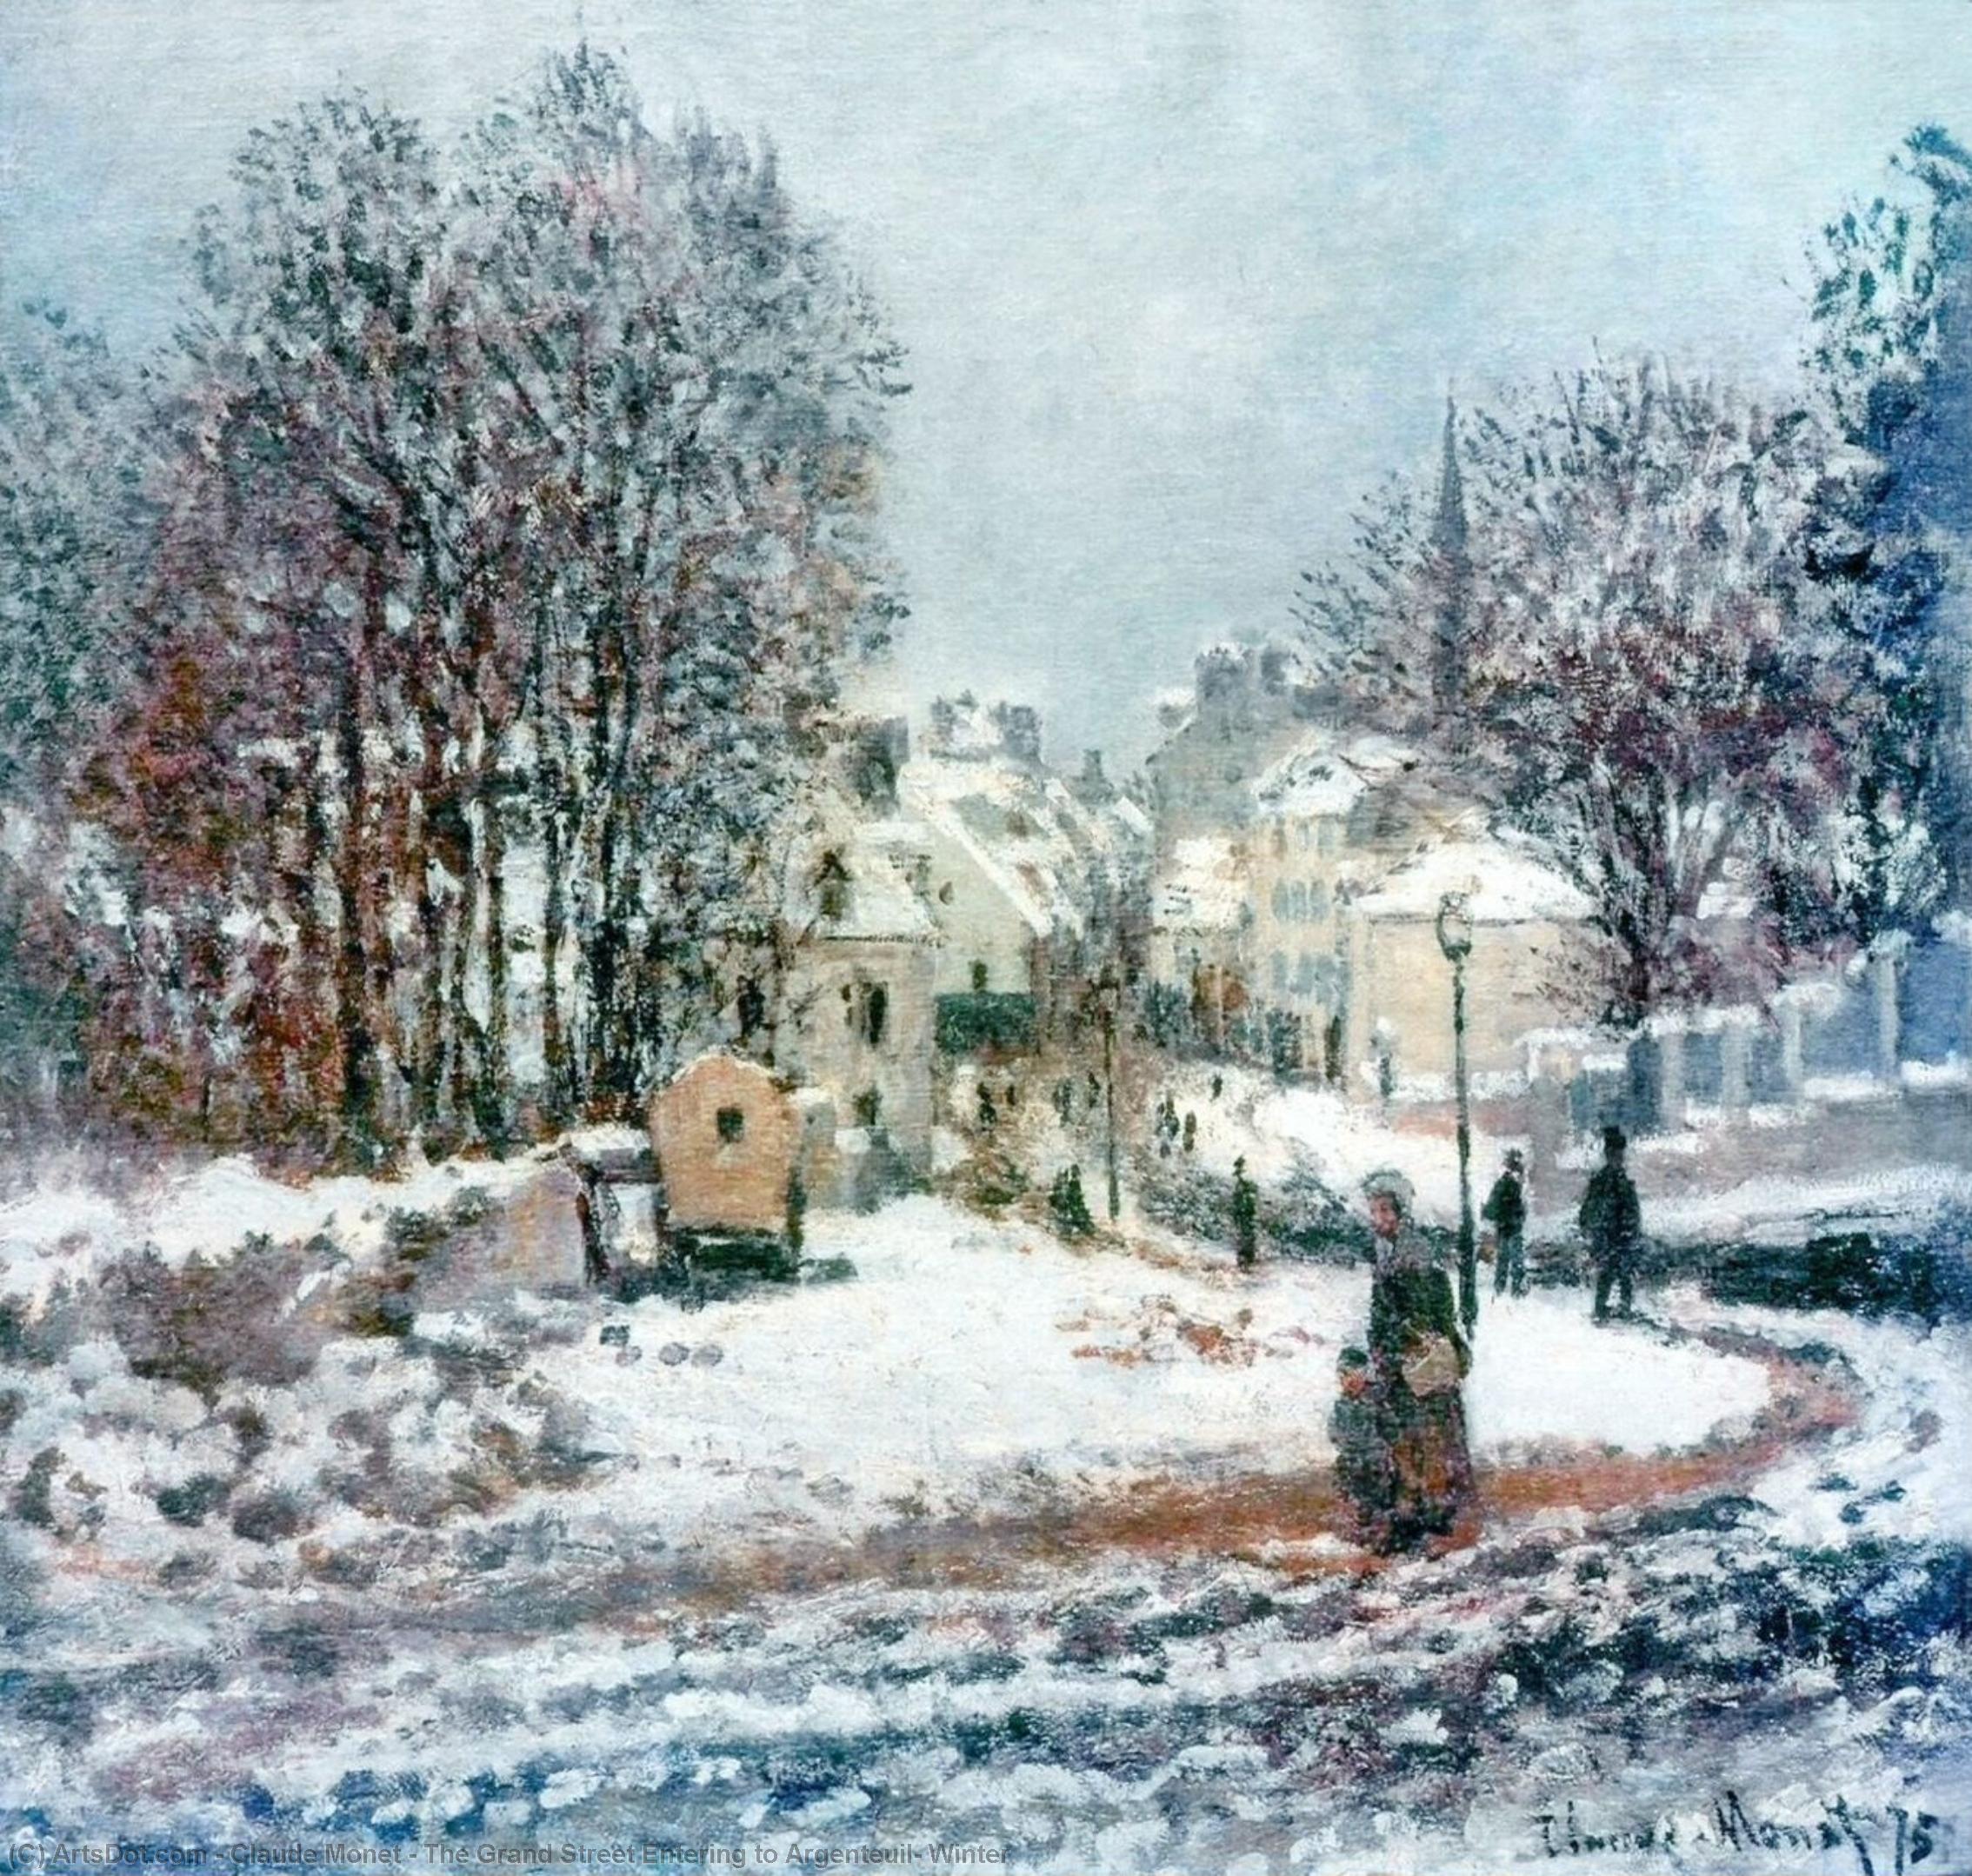 Order Paintings Reproductions The Grand Street Entering to Argenteuil, Winter, 1885 by Claude Monet (1840-1926, France) | ArtsDot.com